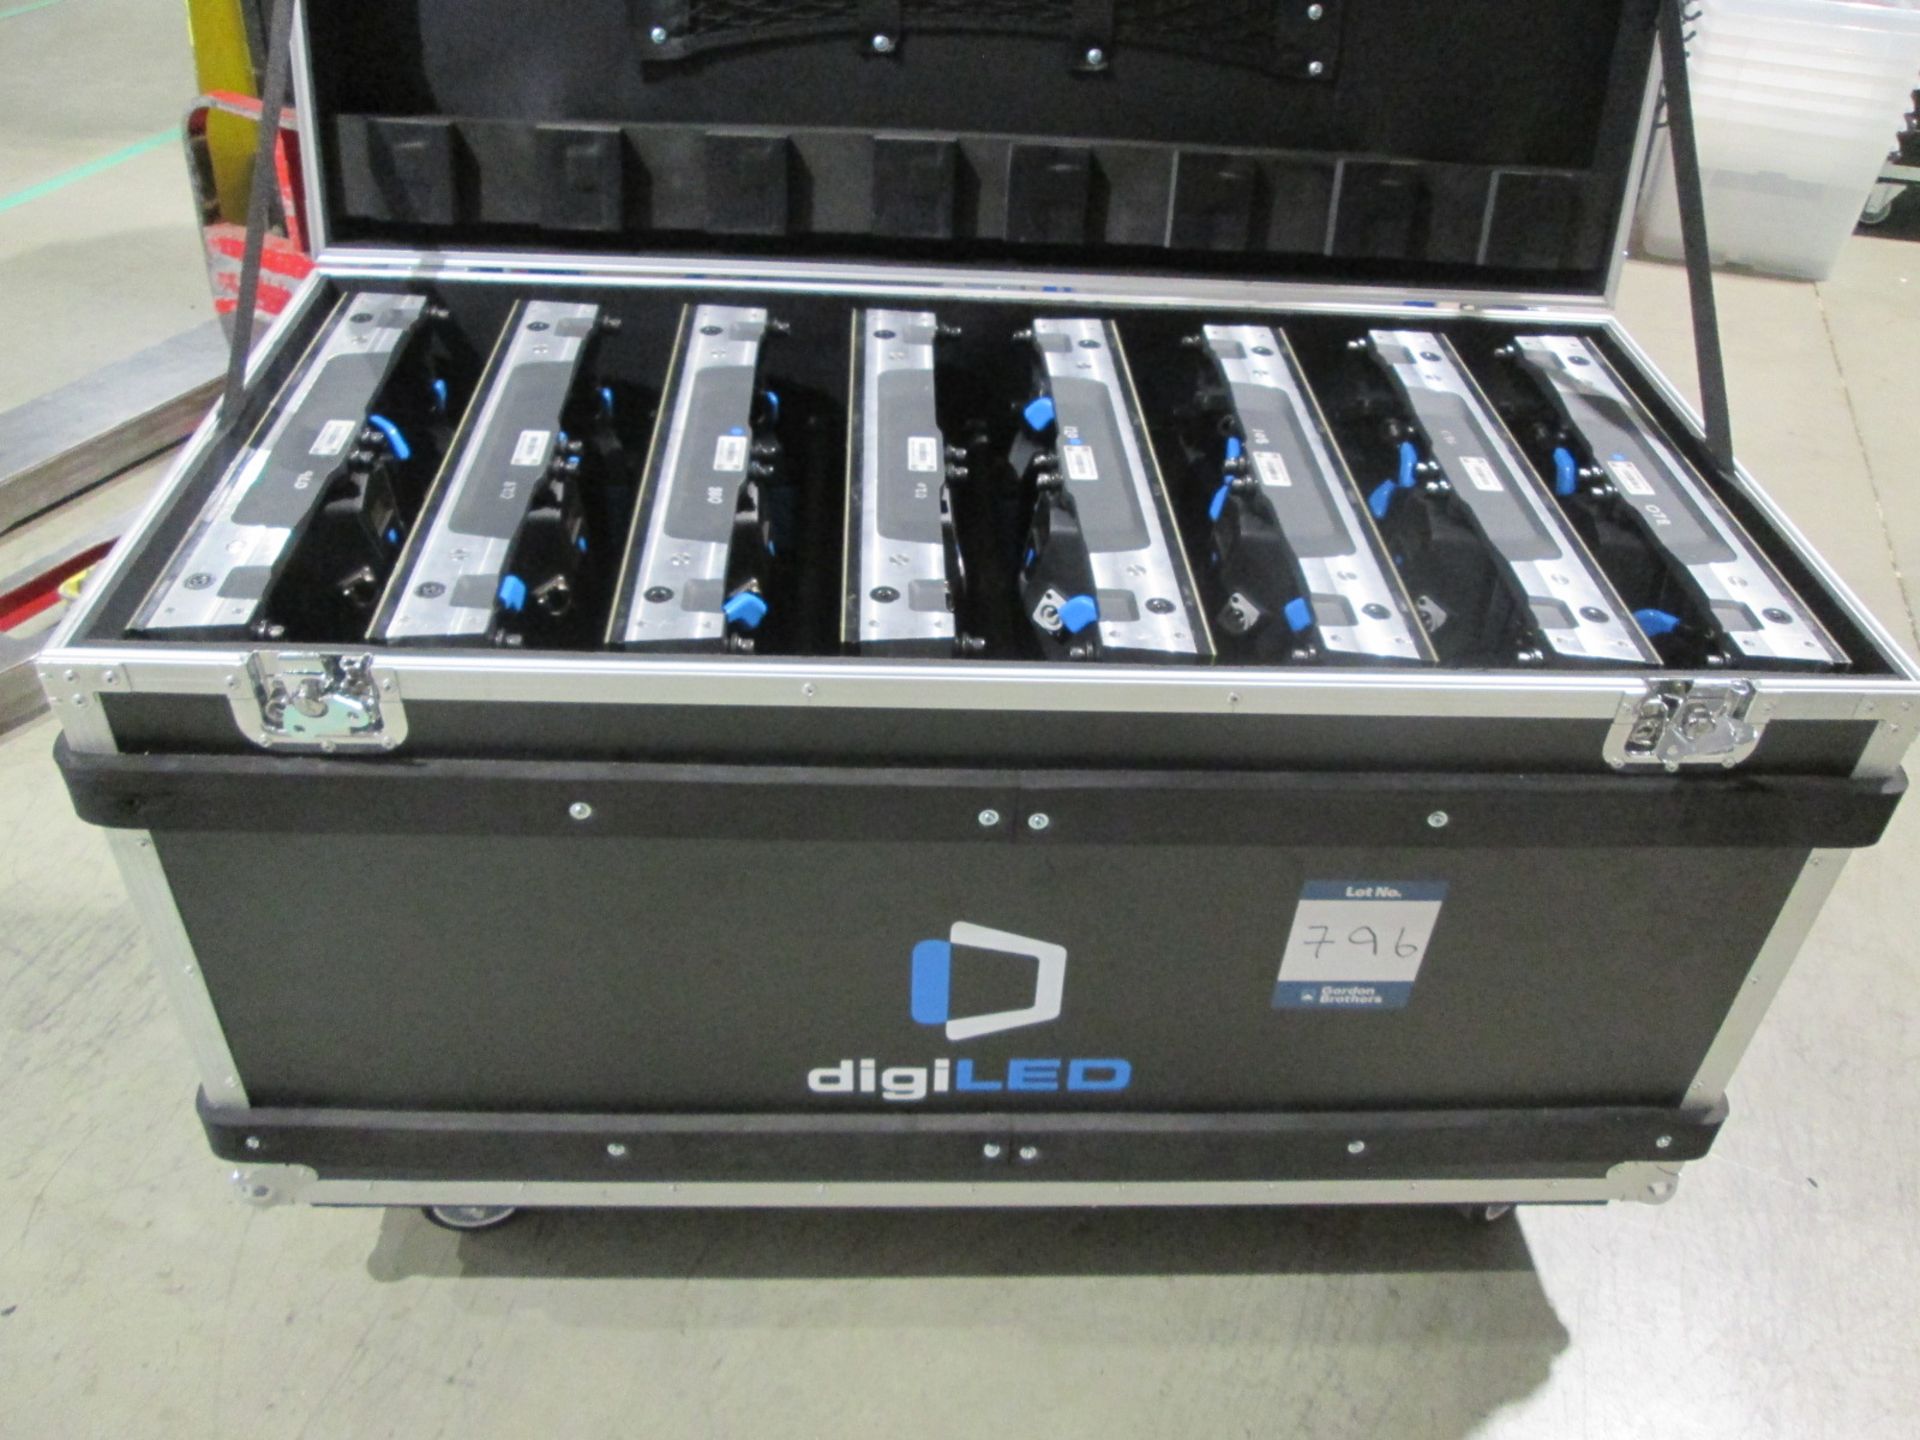 DigiLED x-Tek 2600 LED Modules (Blue) Qty 8 off in flight case. Note tiles only no cables (Please